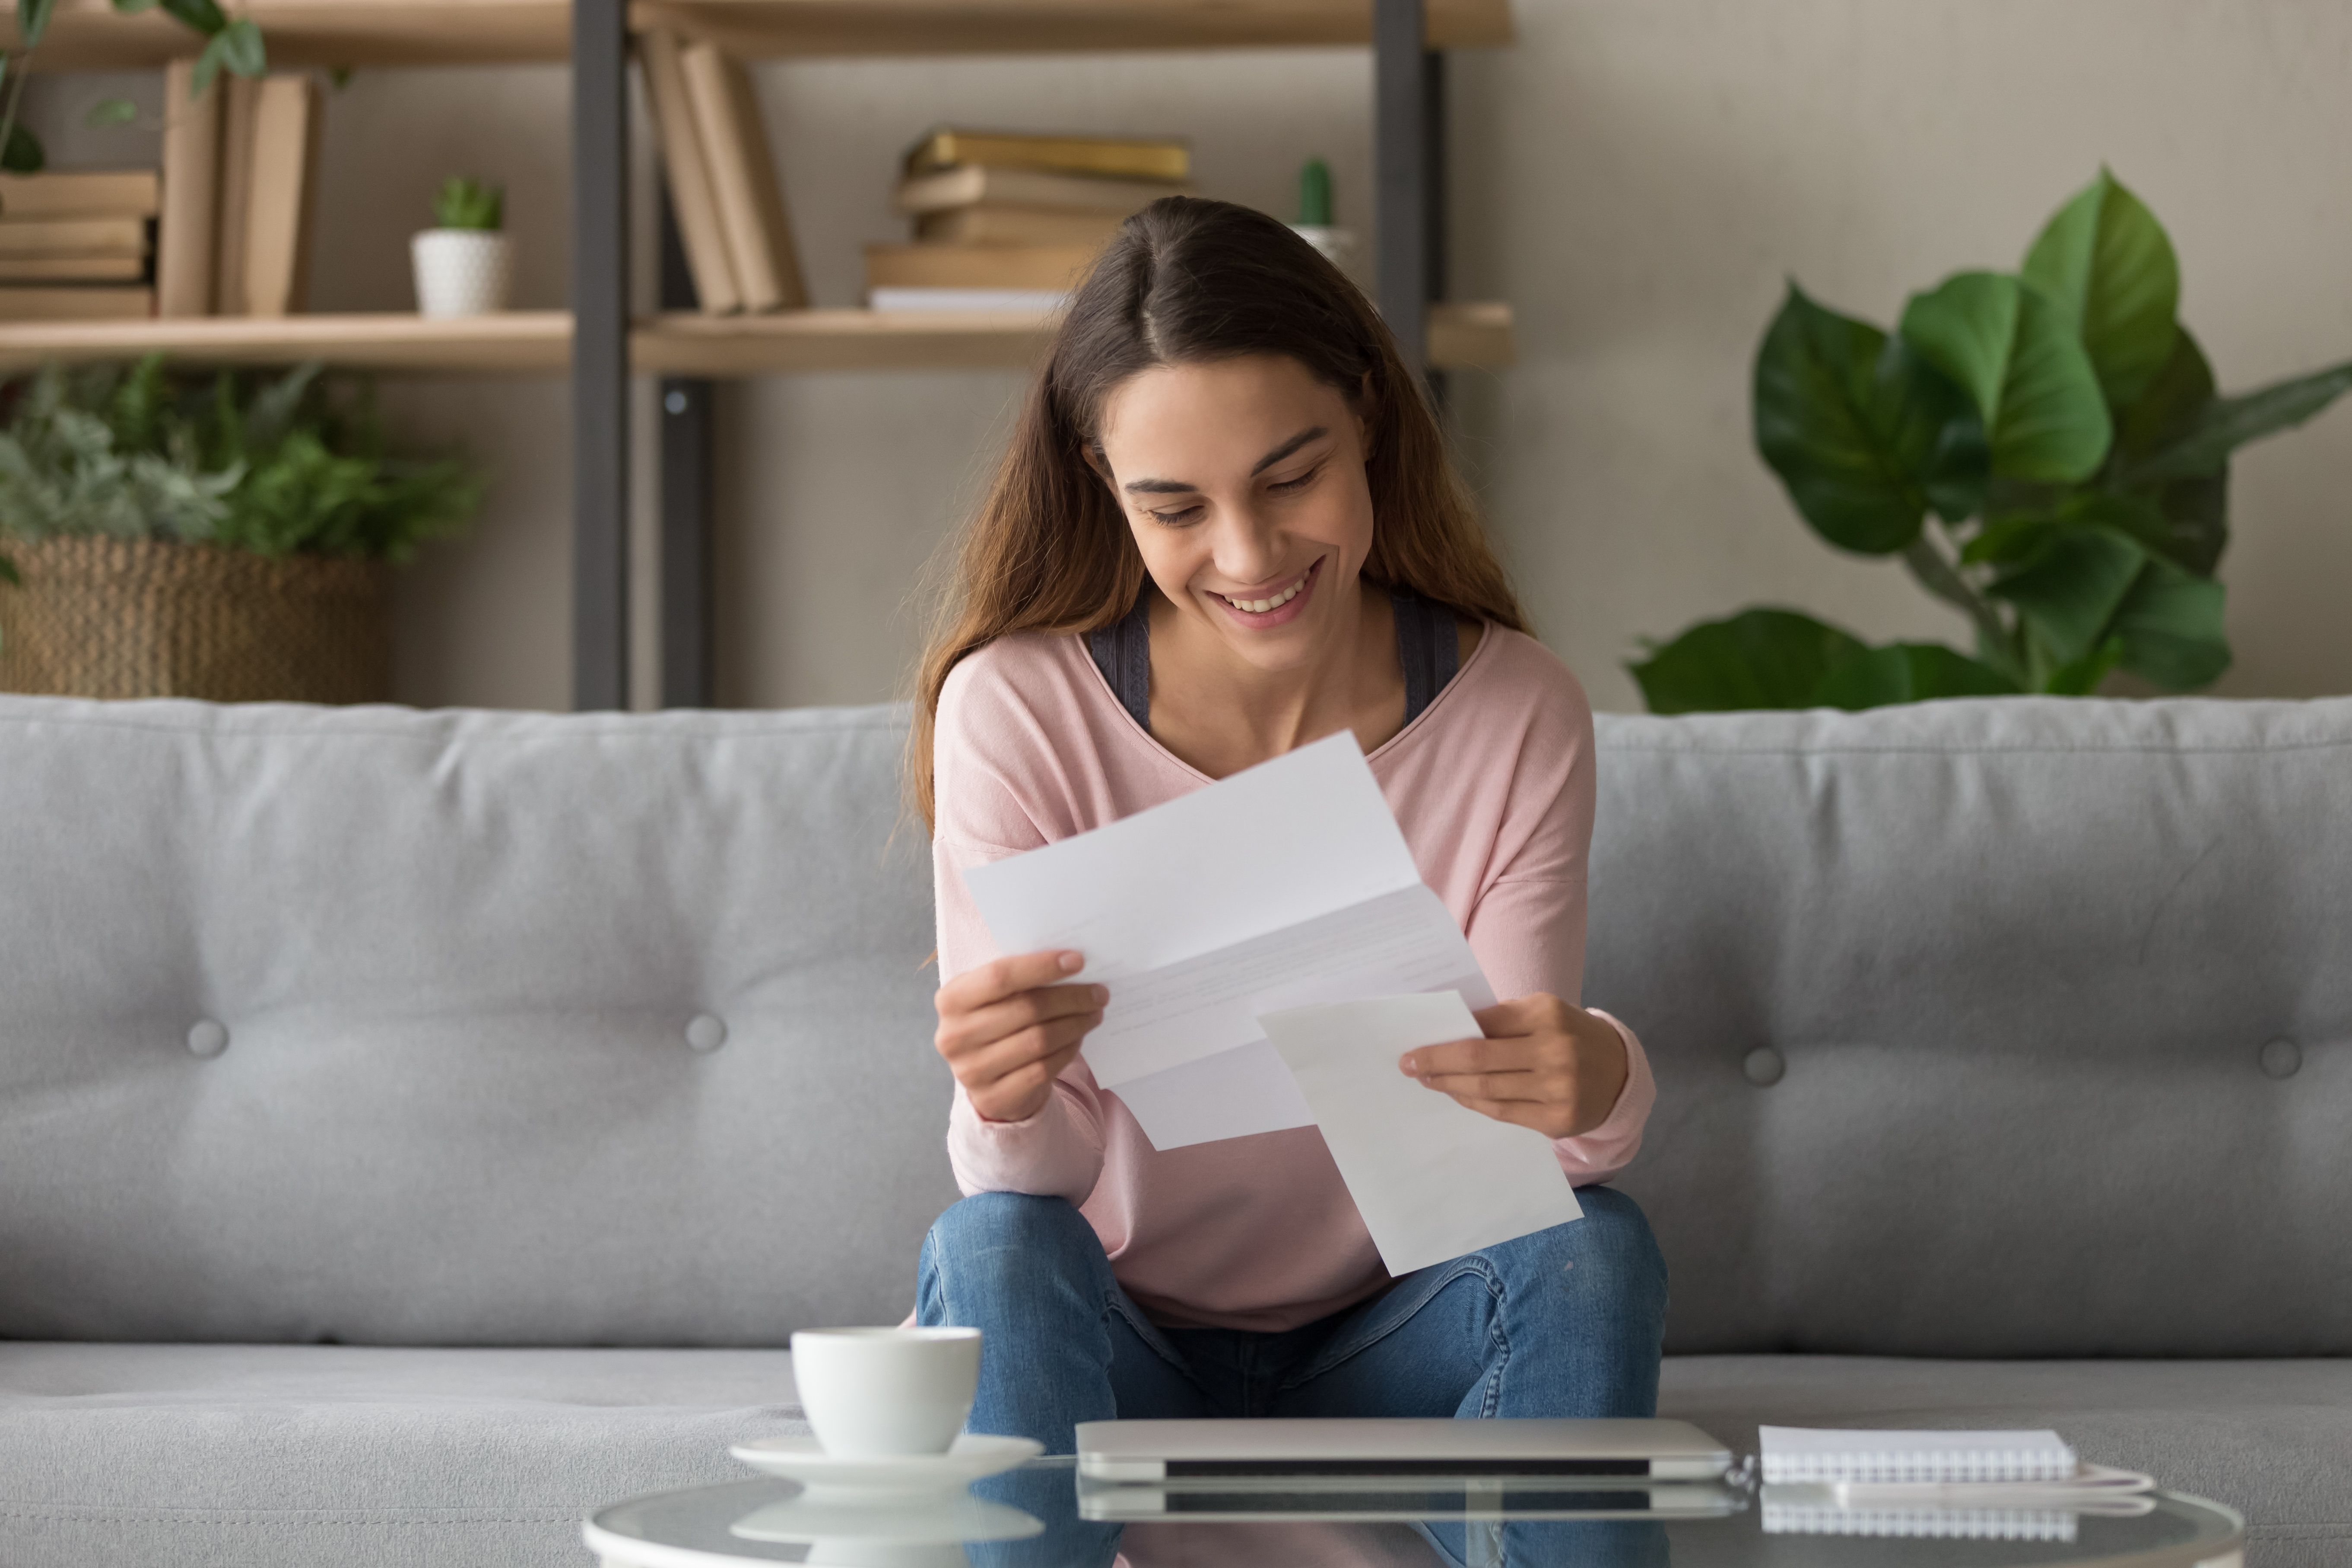 Happy smiling millennial girl holding paper document, received good news letter, university admission notification, last banking debt payment, high paid job offer, sitting on comfortable sofa at home.